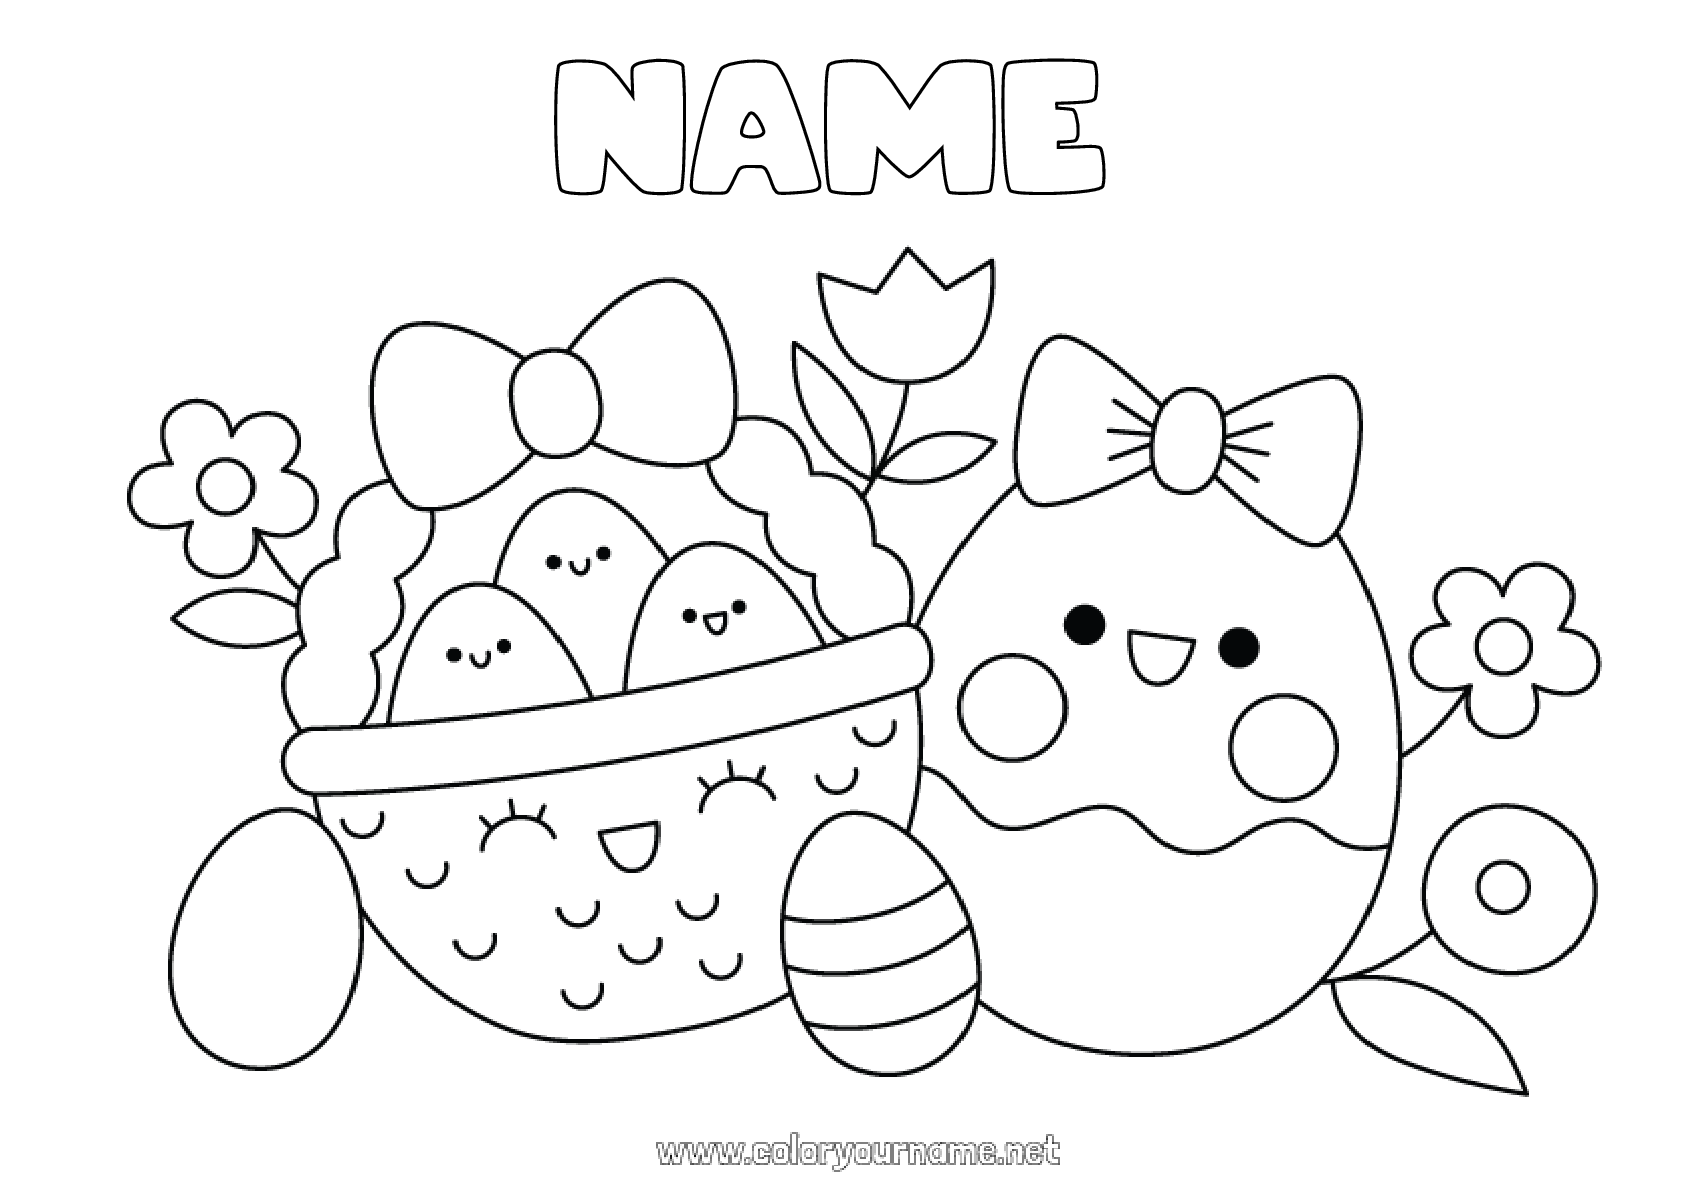 coloring-page-no-1315-kawaii-easter-eggs-easter